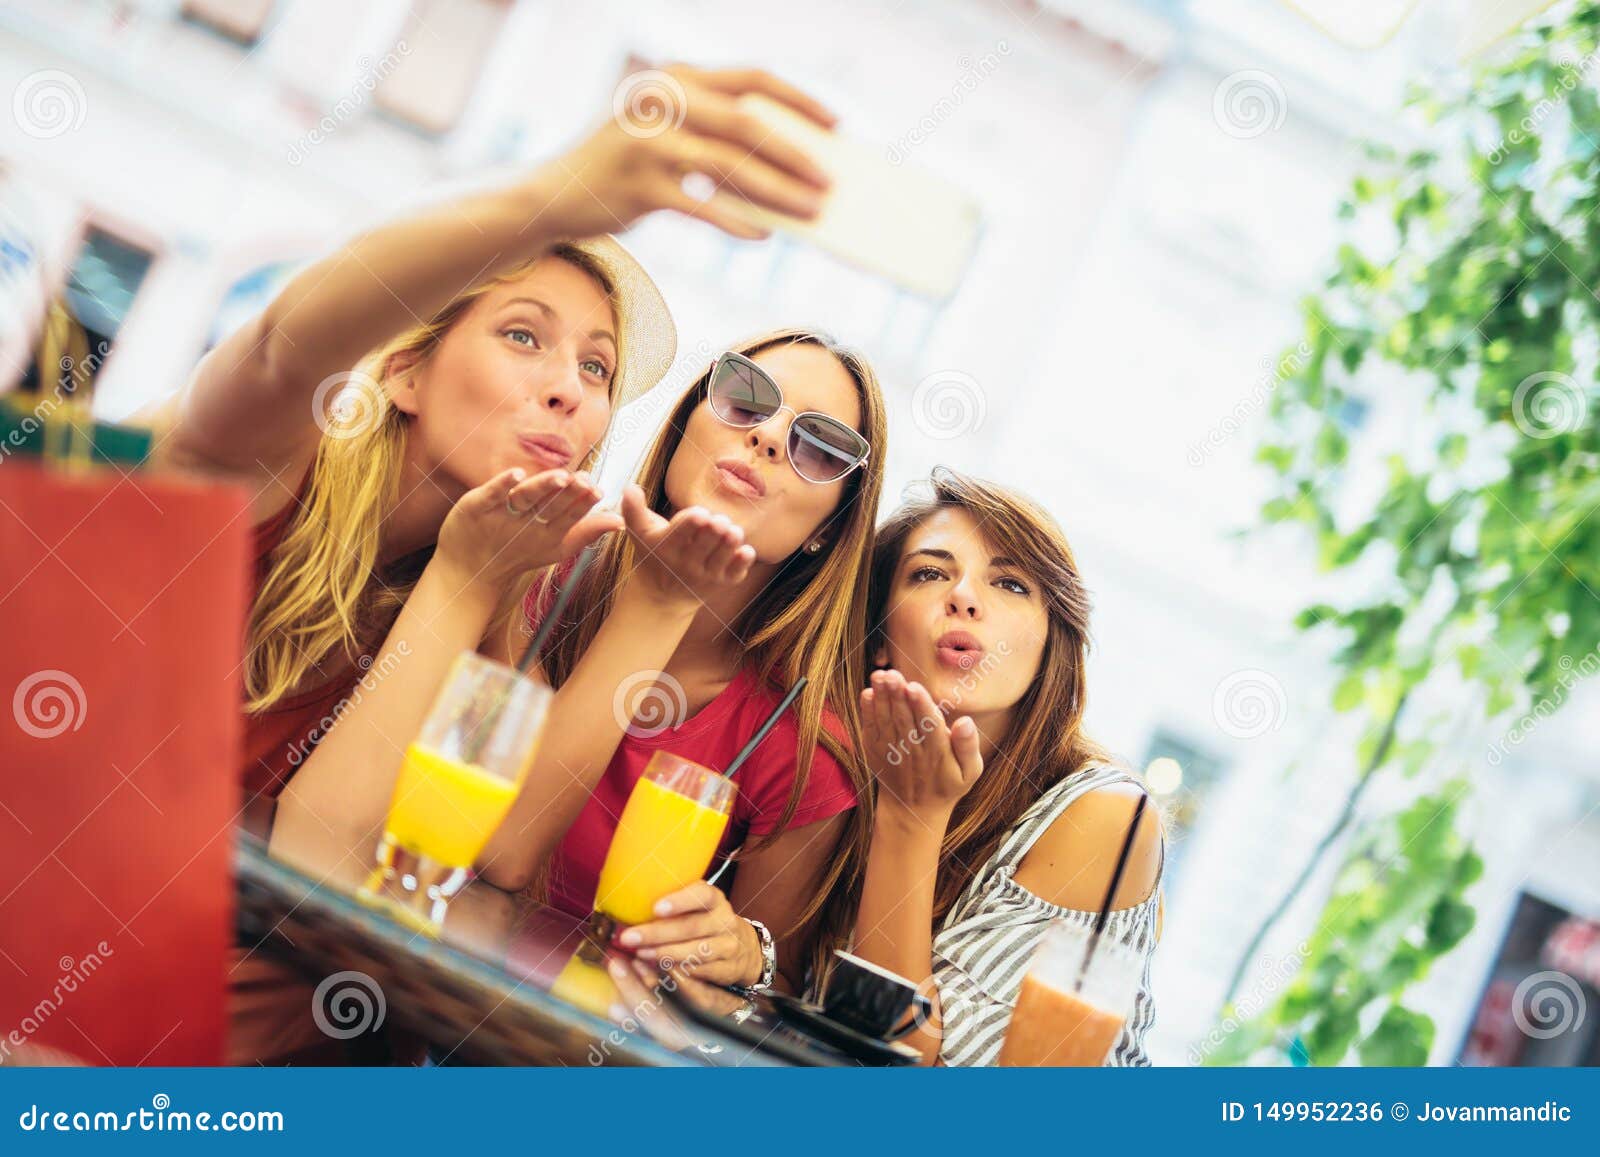 Young Women in a Cafe after a Shopping Make Selfie Photo Stock Photo ...